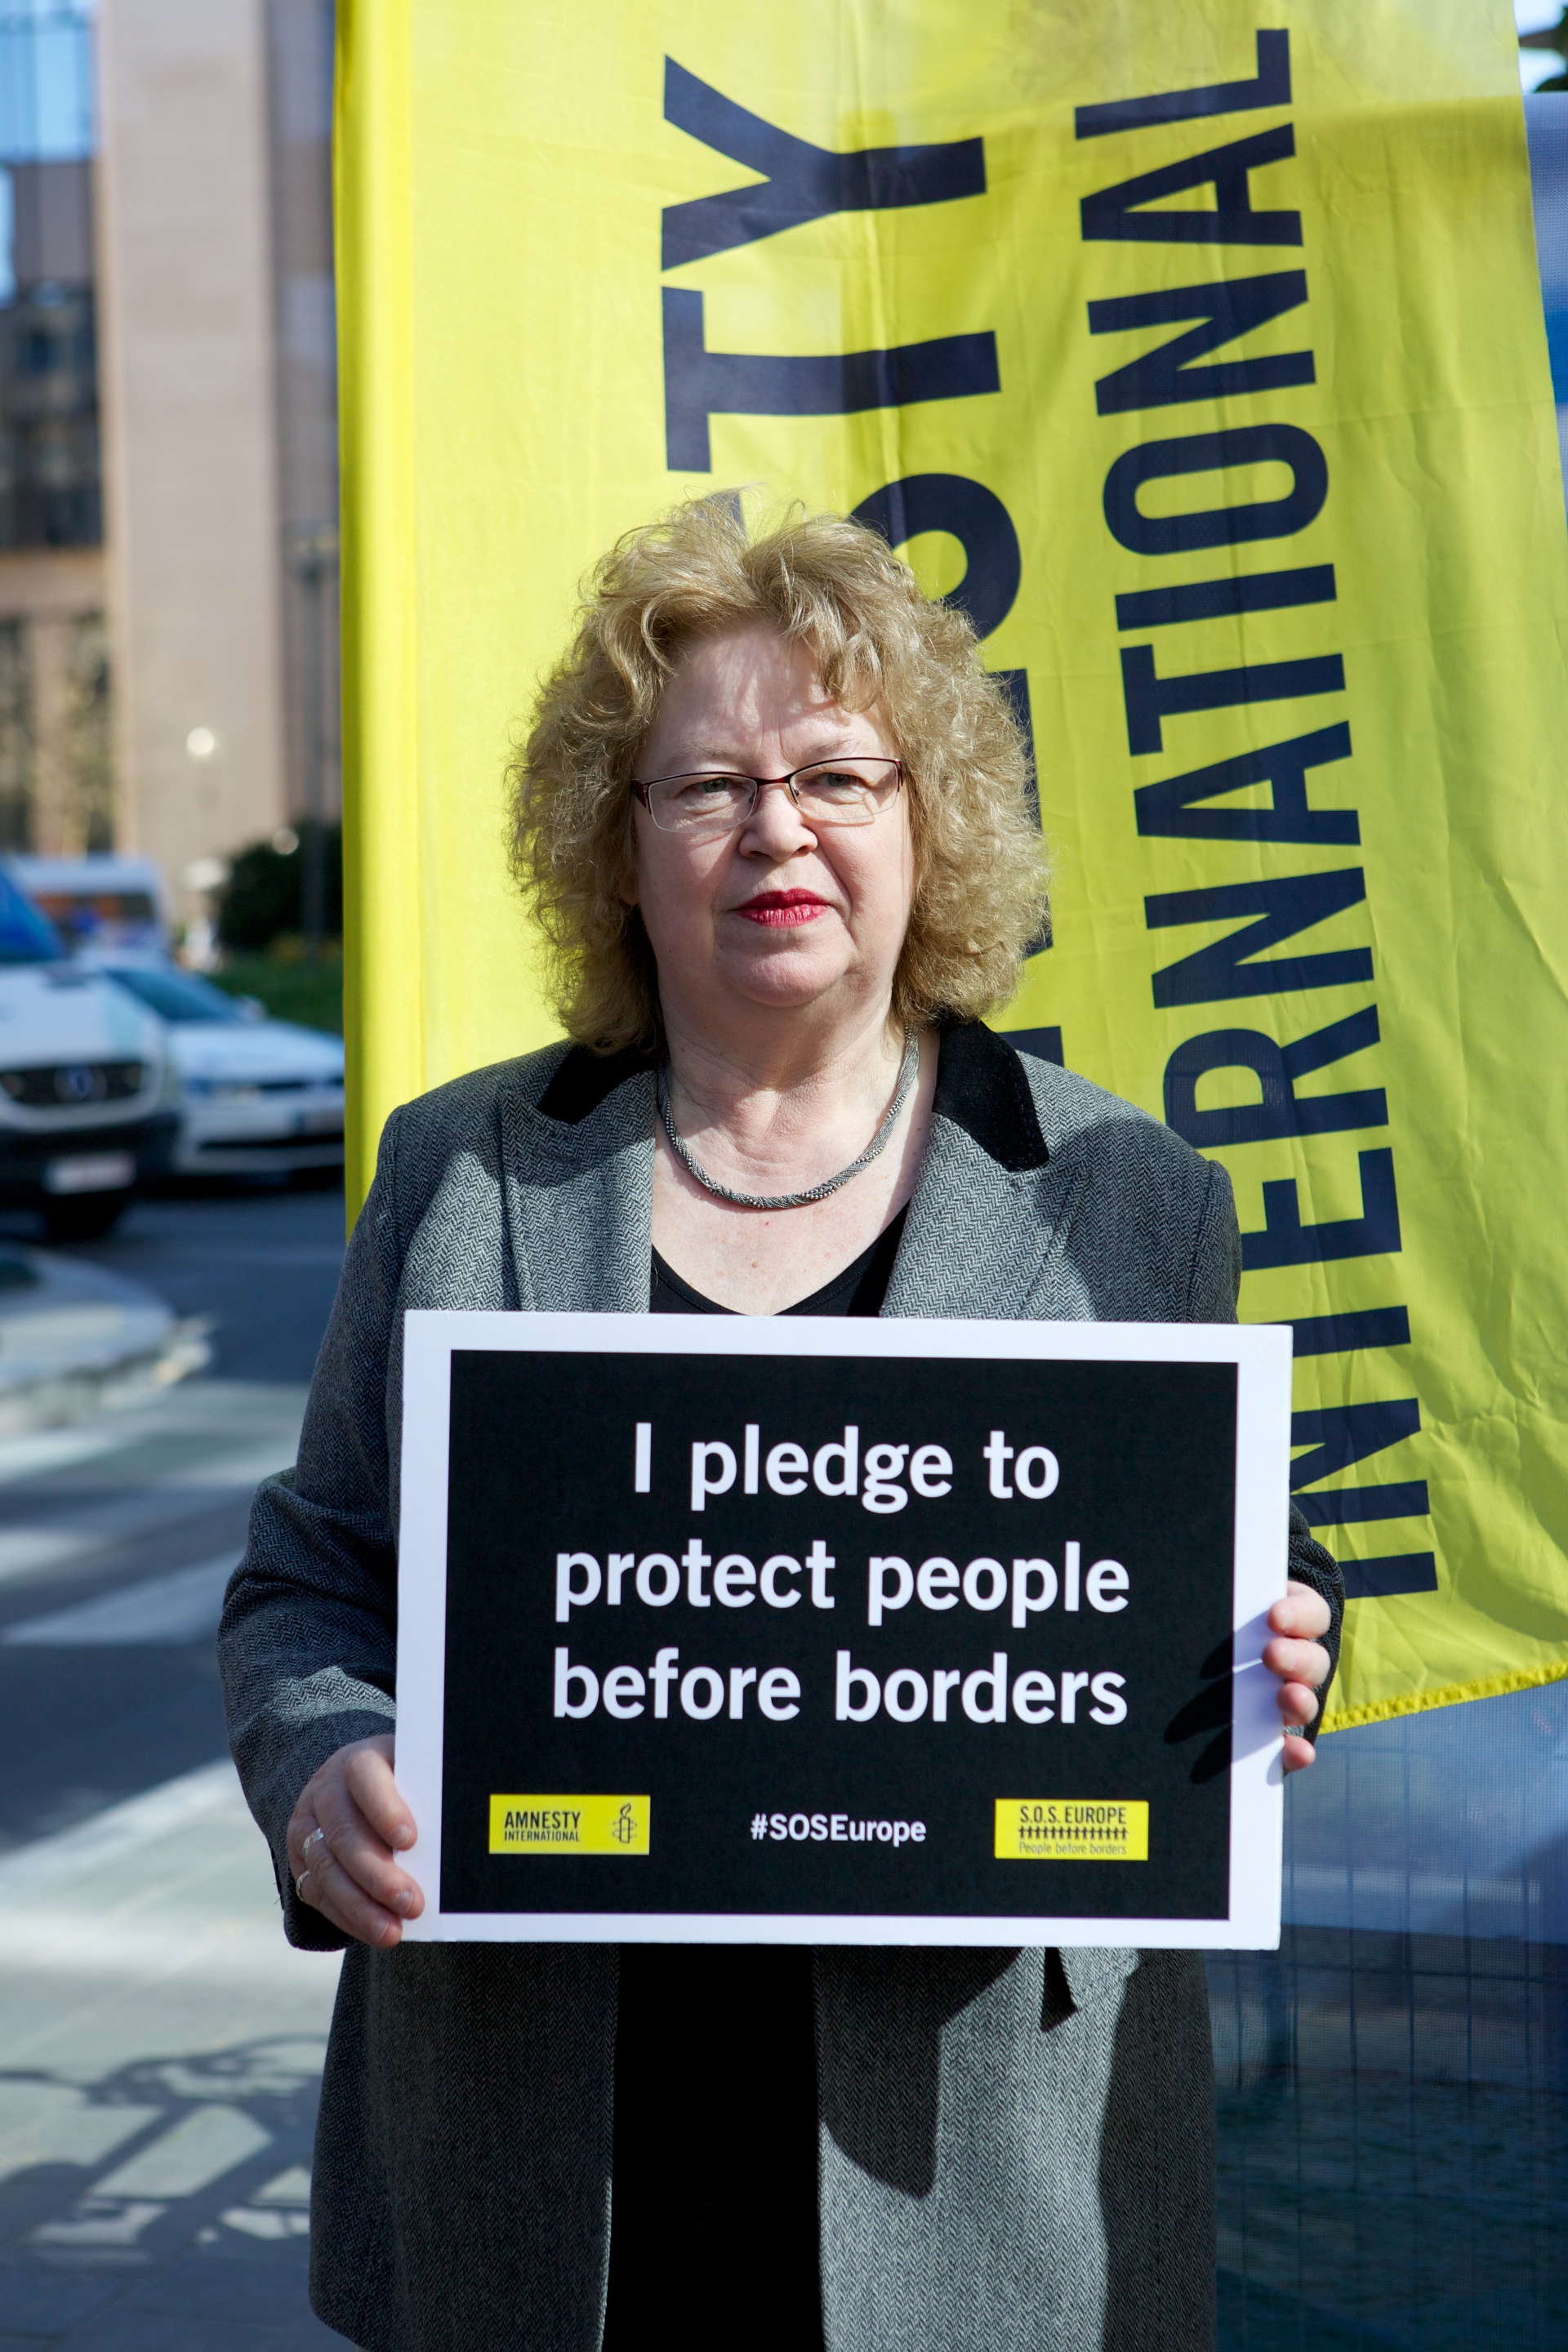 Jean holding borders action sign, pledging to protect people above borders